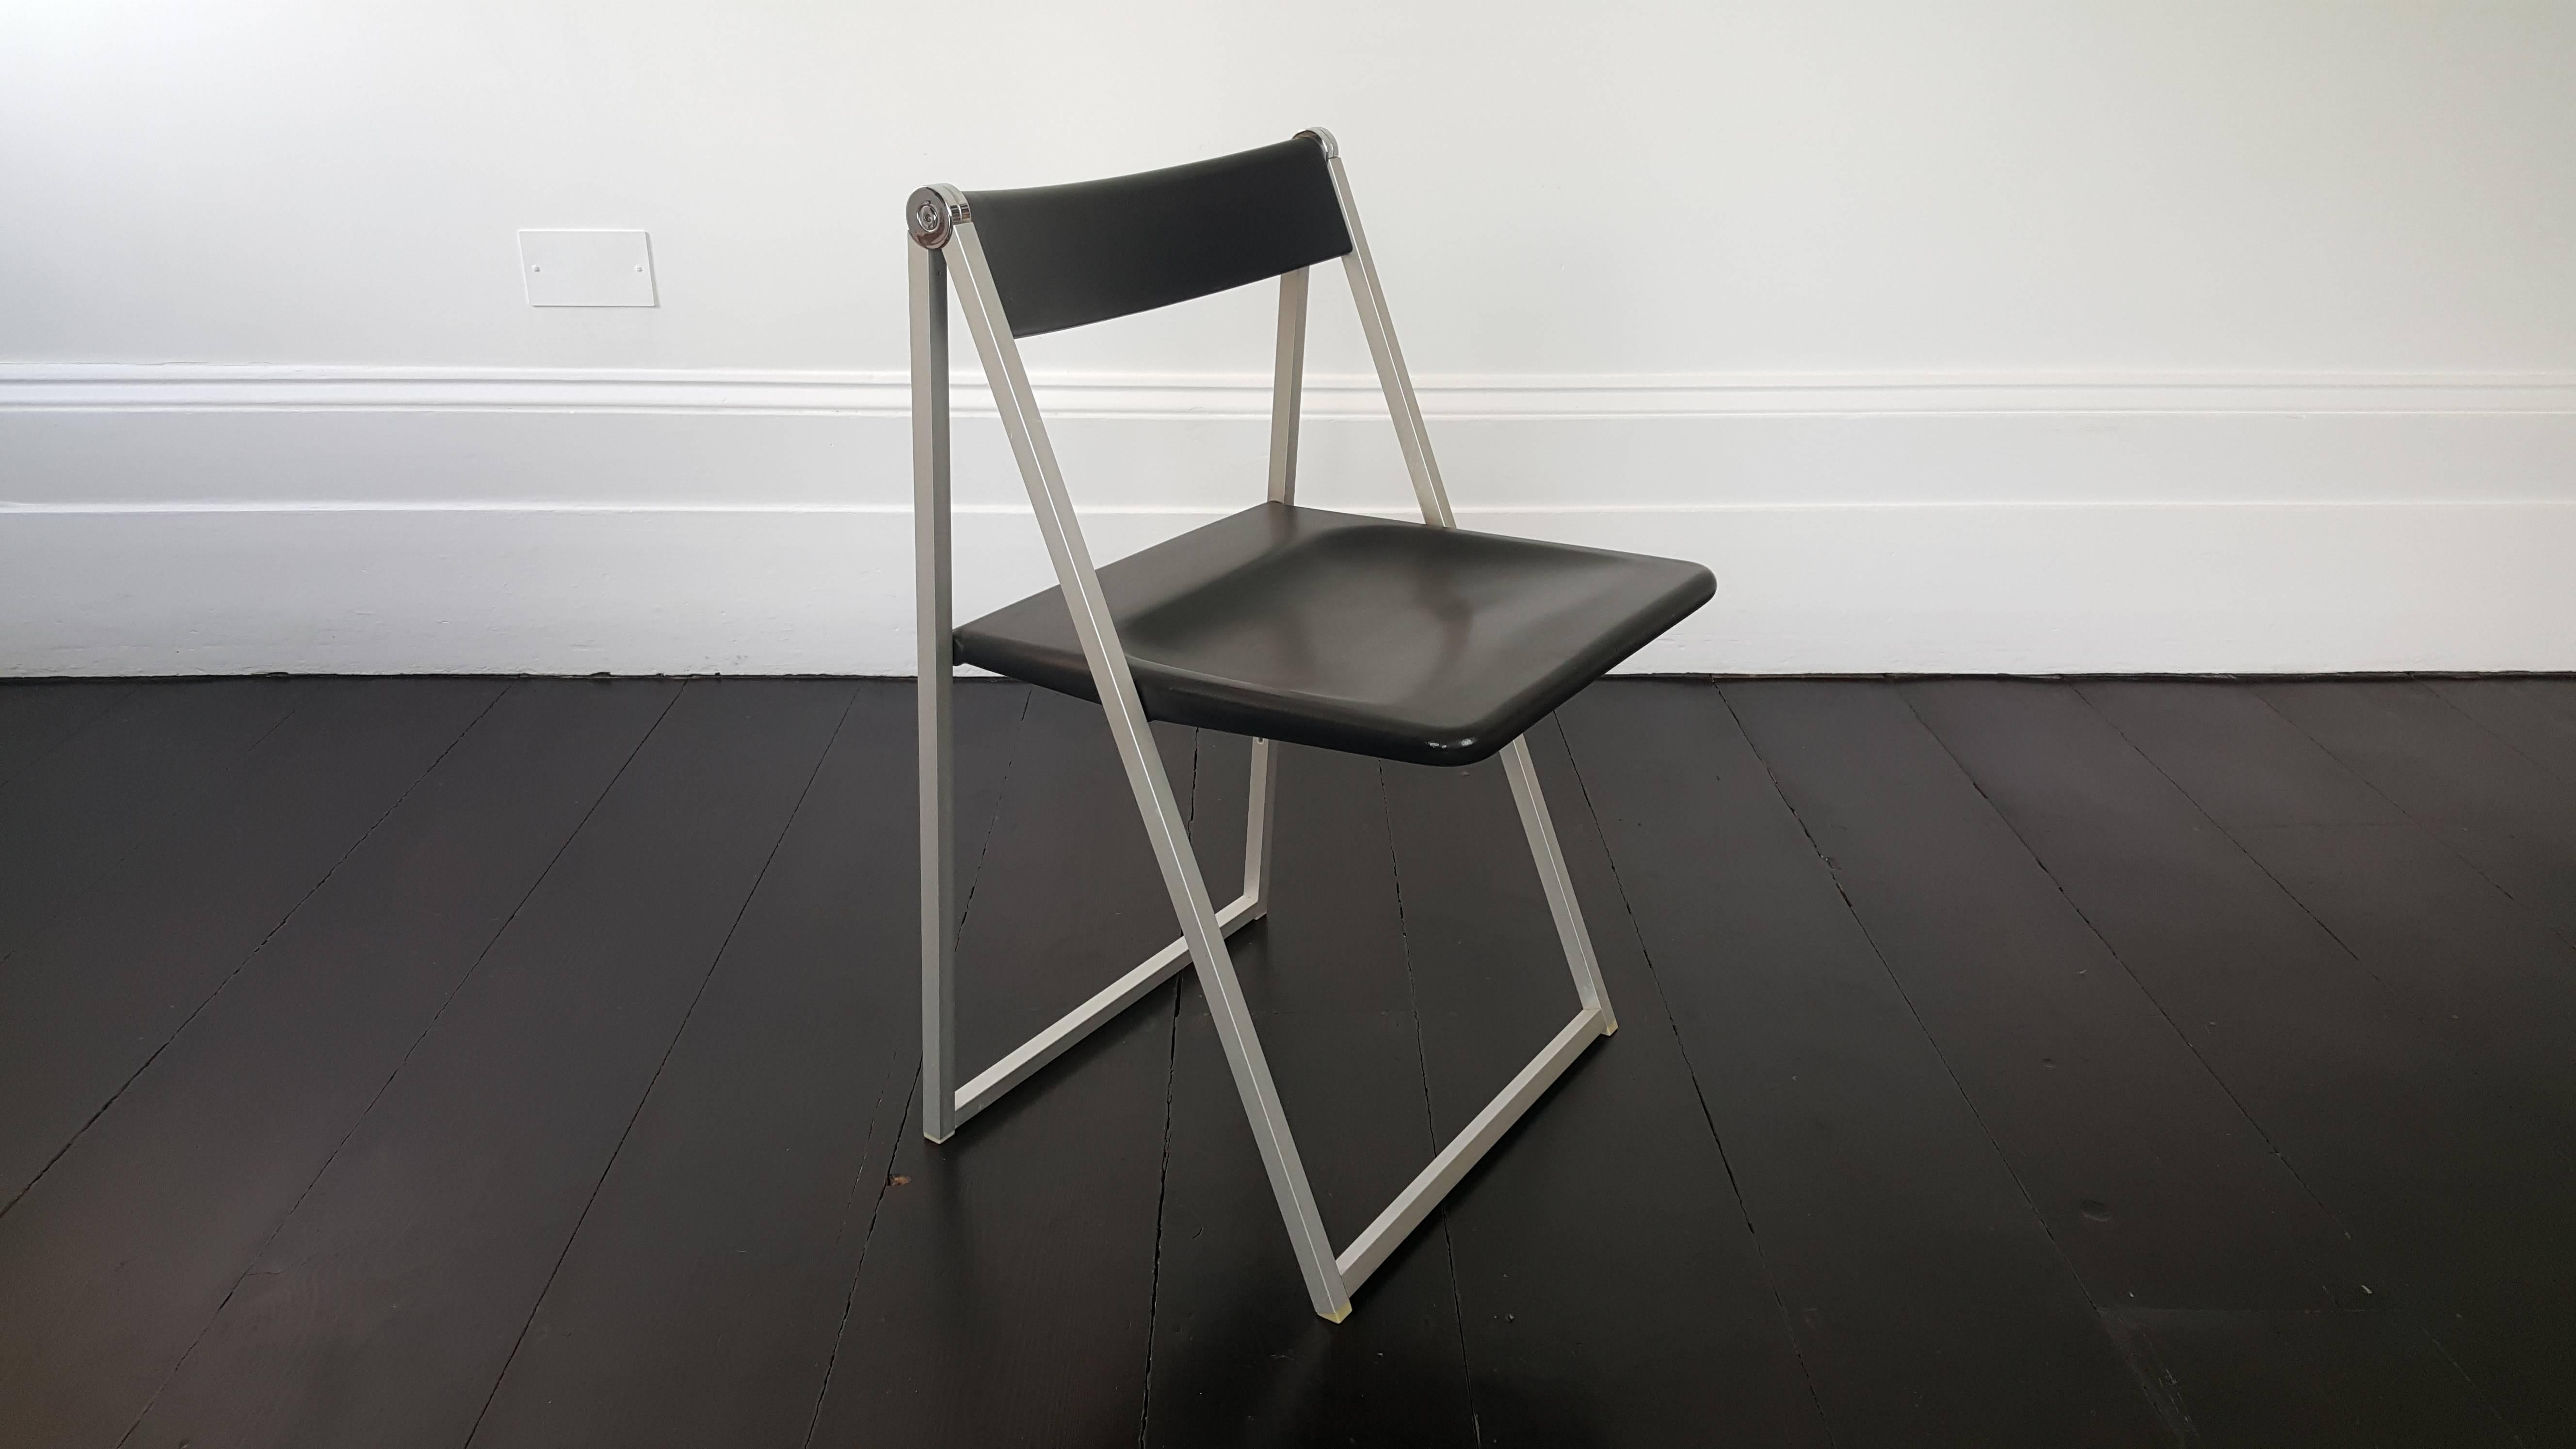 Folding Chair, Designed in 1971 by Team Form AG, Manufactured by Interlübke 1